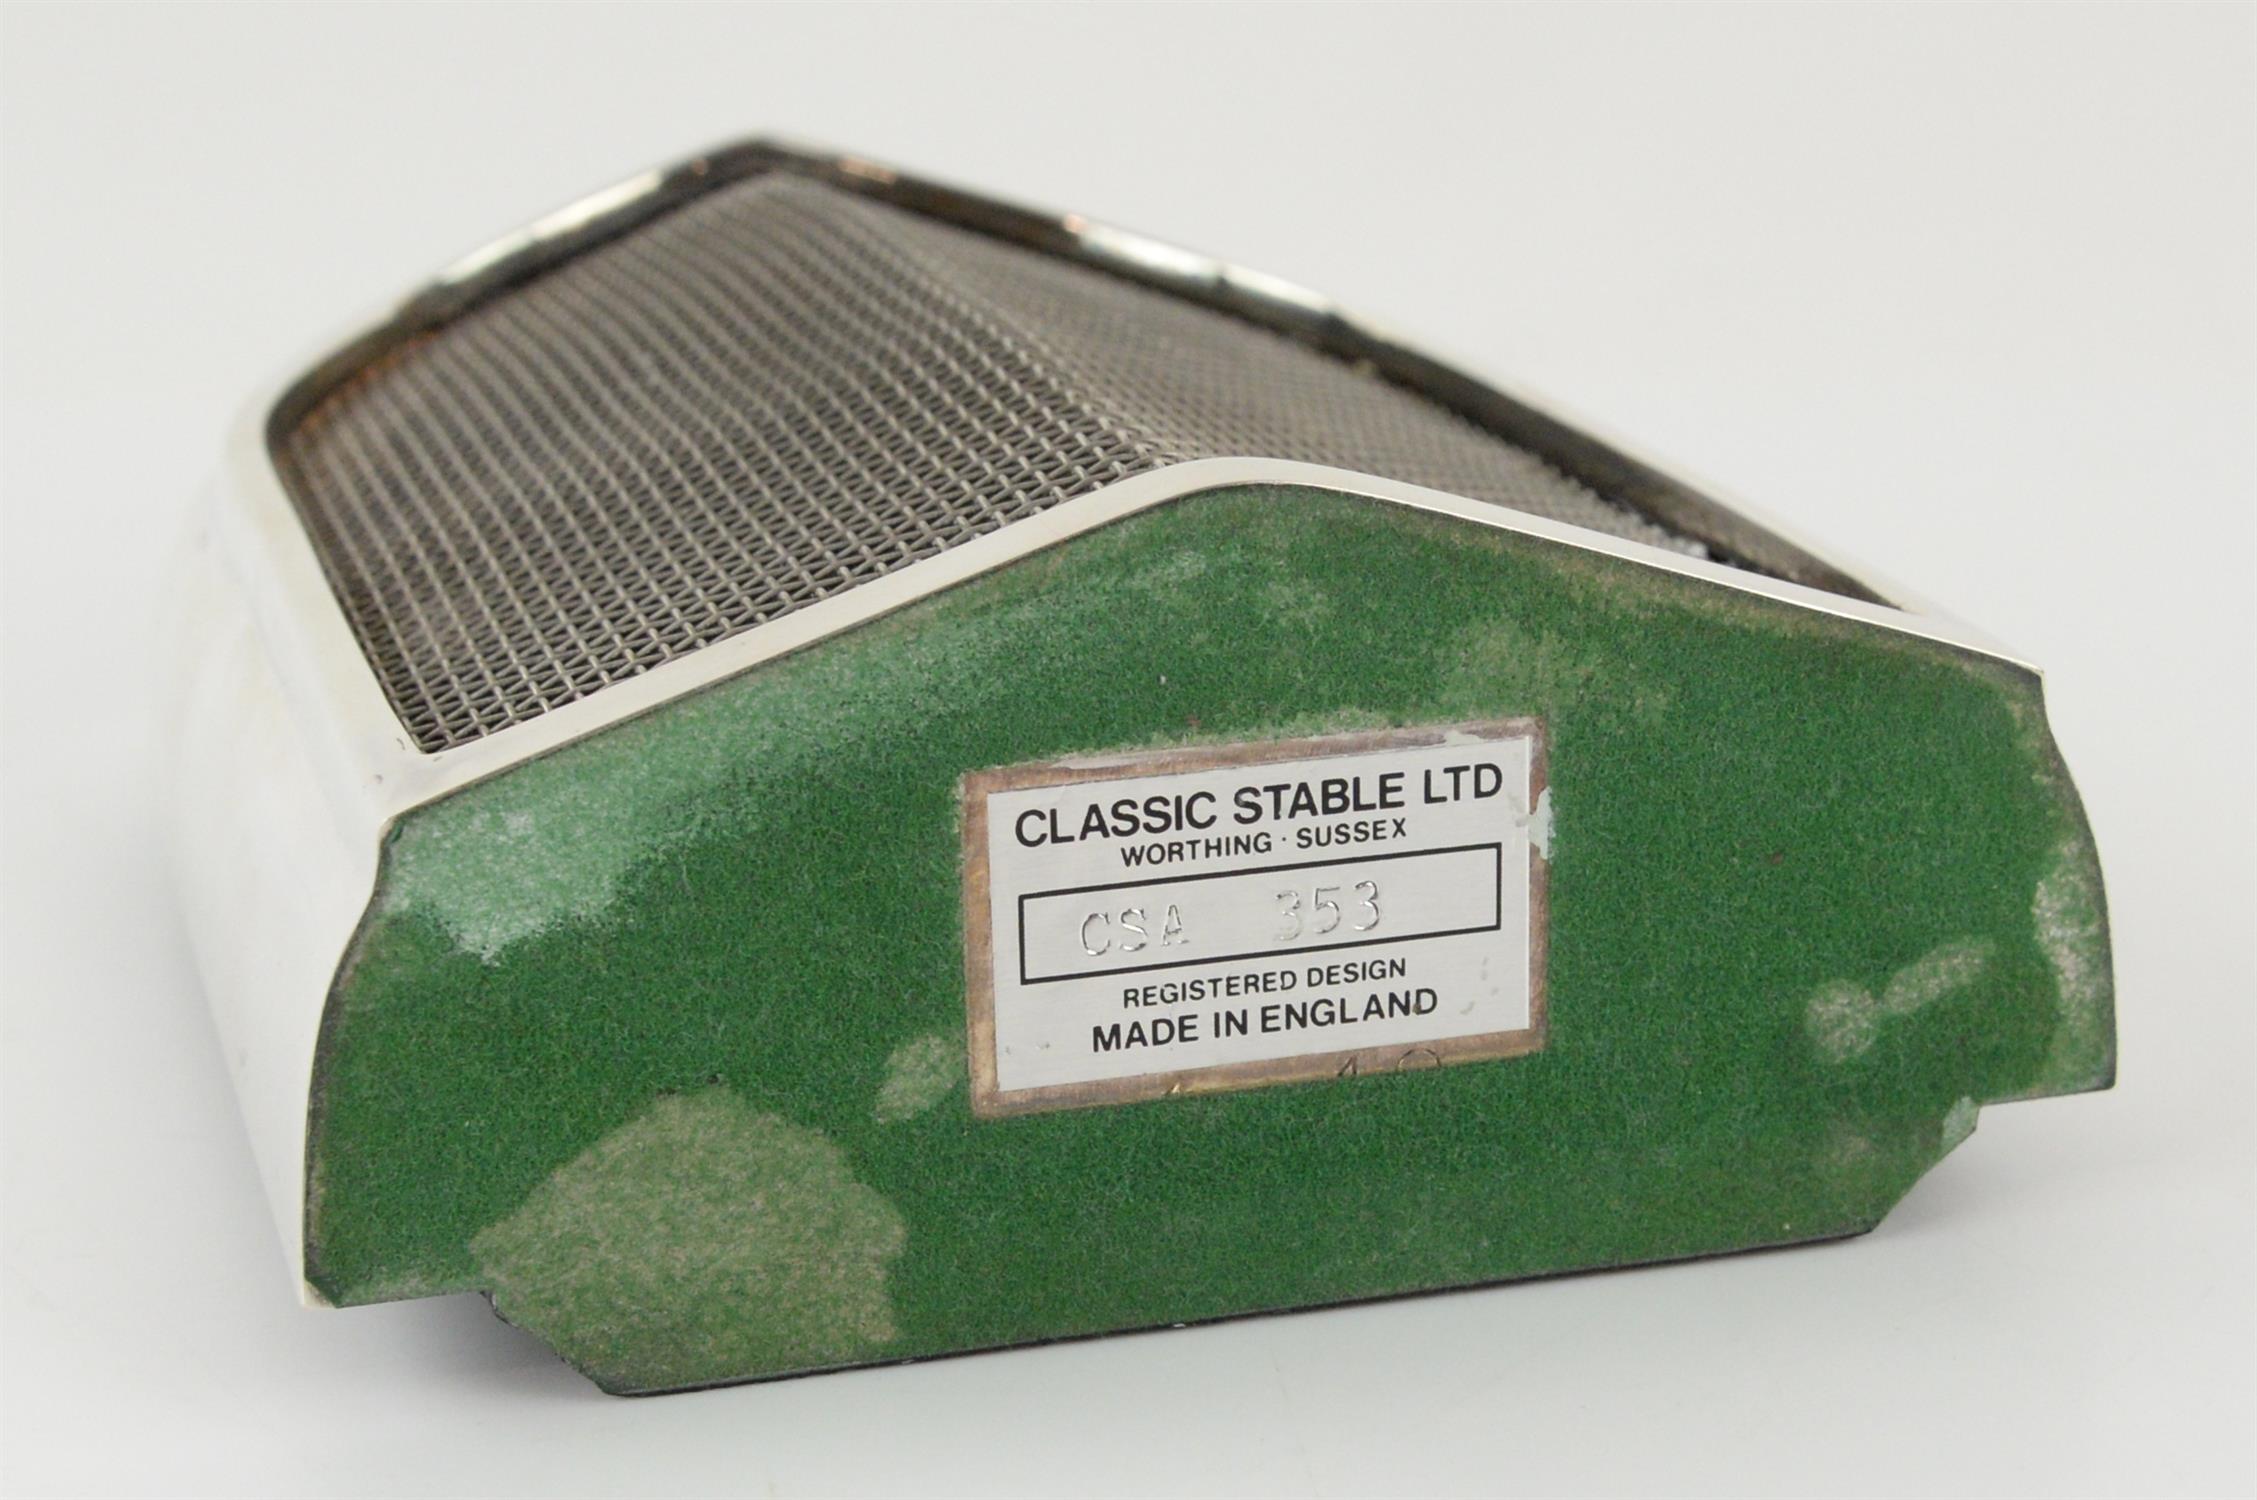 Classic Stable Ltd Famous Radiator Bentley decanter, in fitted box - Image 4 of 4